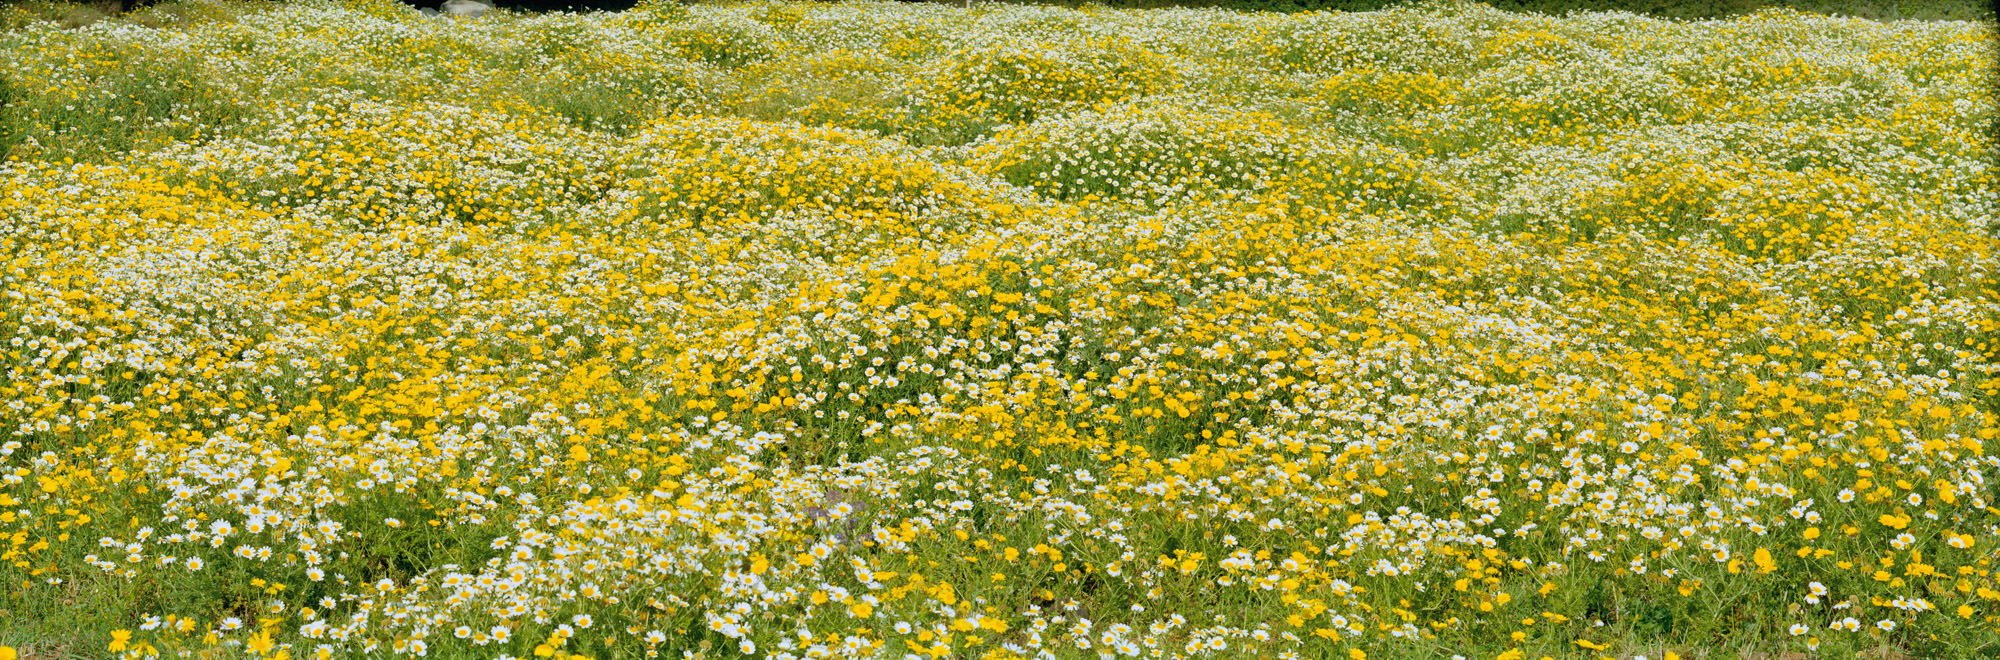 fallow land, landscape, nature, analogue photography, large format, panoramic photography, Markus Bollen, 6x17, green, life, growth, peace, calm, grass, meadow, buttercups, daisies, photography, photography, large format photography, large format photography